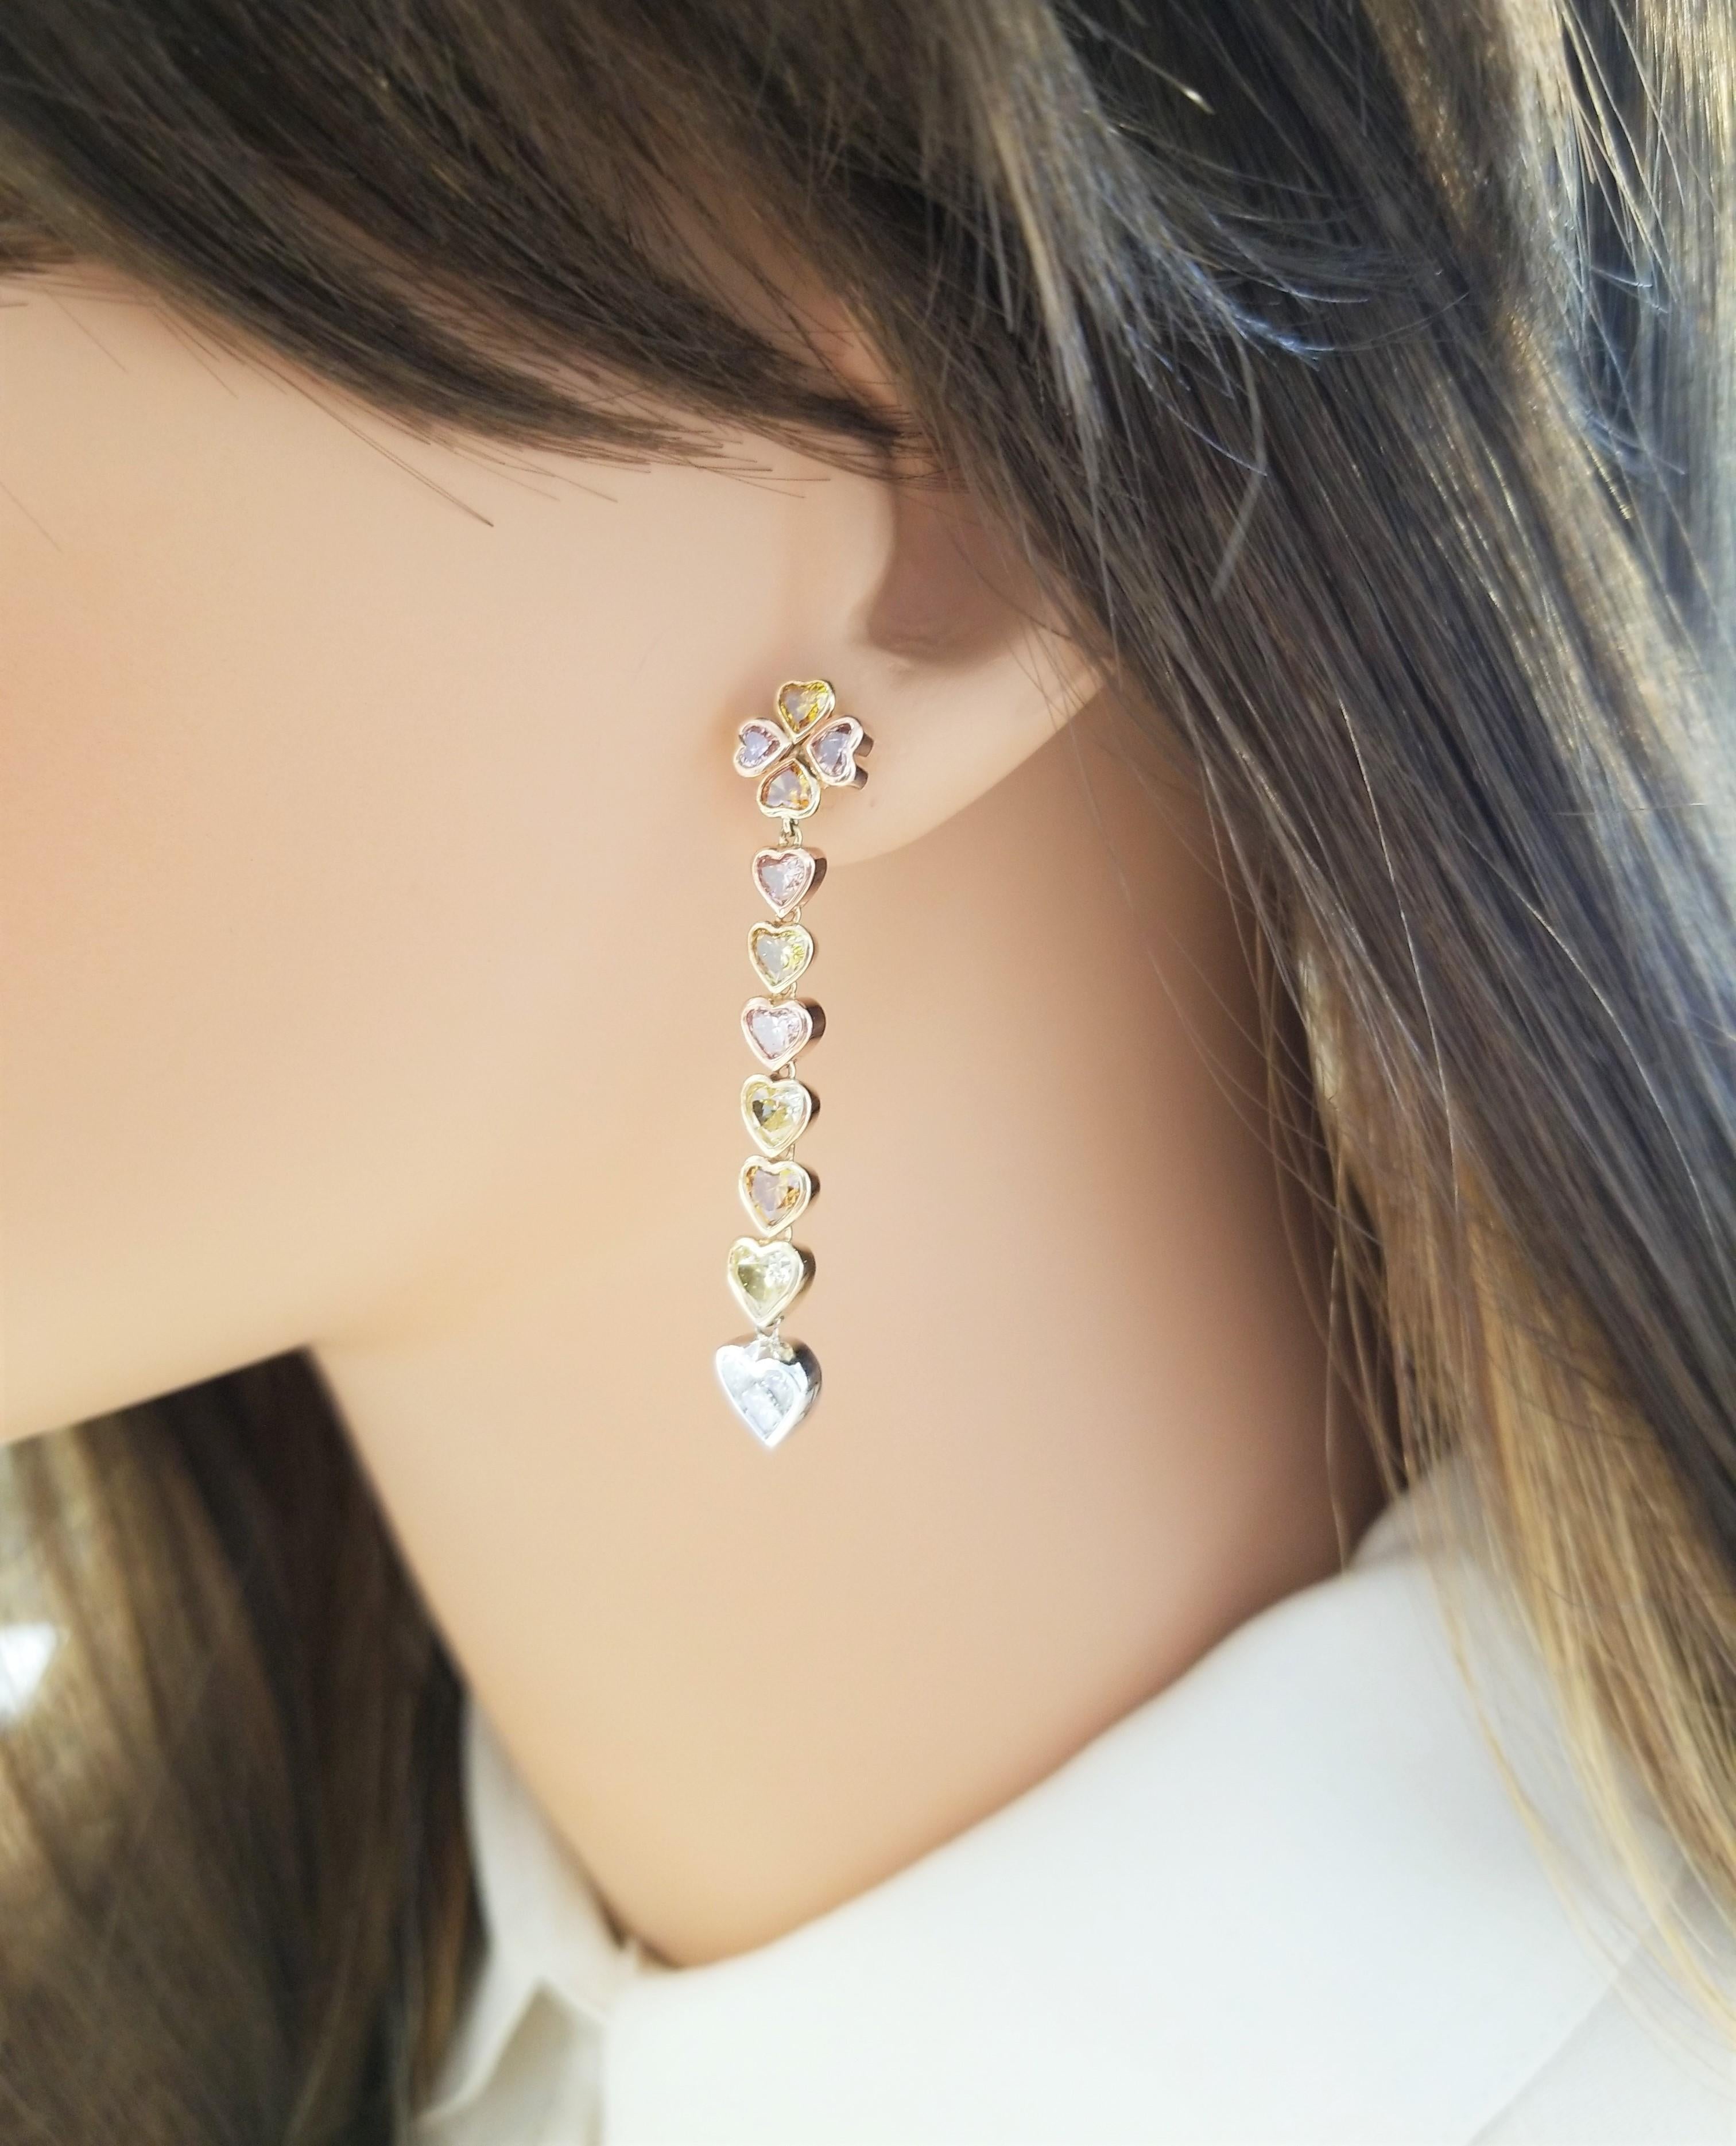 Hearts, hearts, and more hearts! These lavish diamond dangle earrings feature diamond hearts for days!  The earrings include 3.80 carat total of natural fancy colored heart shaped diamonds in an array of colors: yellow, orange, pink, and